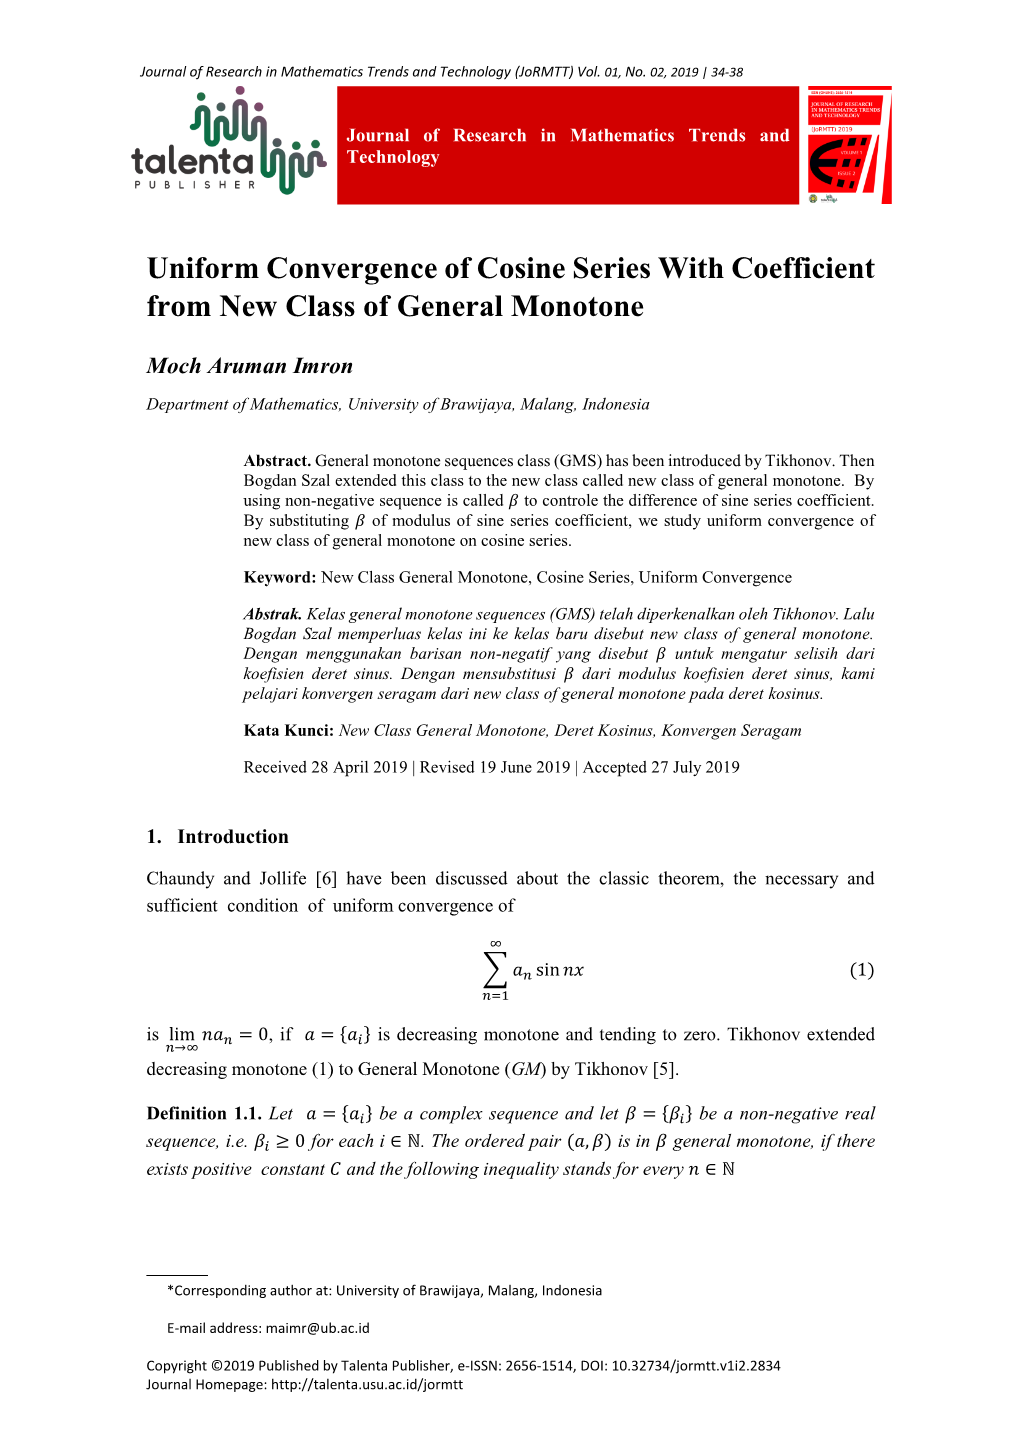 Uniform Convergence of Cosine Series with Coefficient from New Class of General Monotone